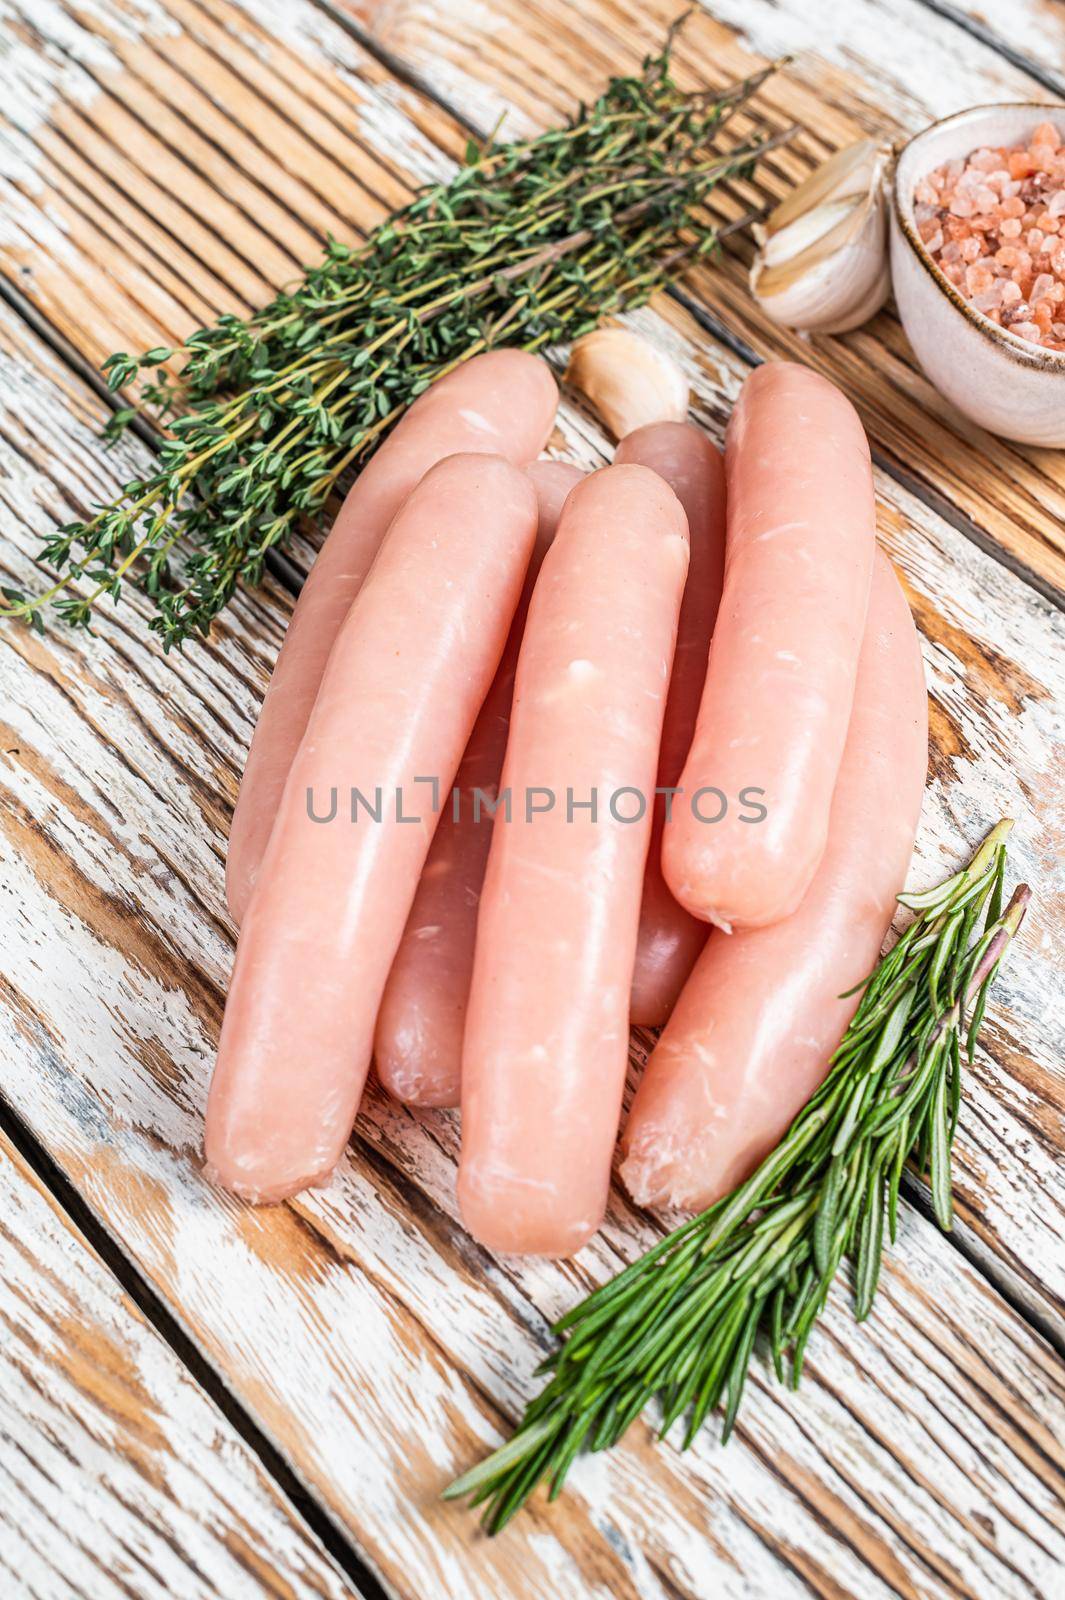 Raw Chicken sausages on a wooden kitchen table with herbs. White wooden background. Top view by Composter